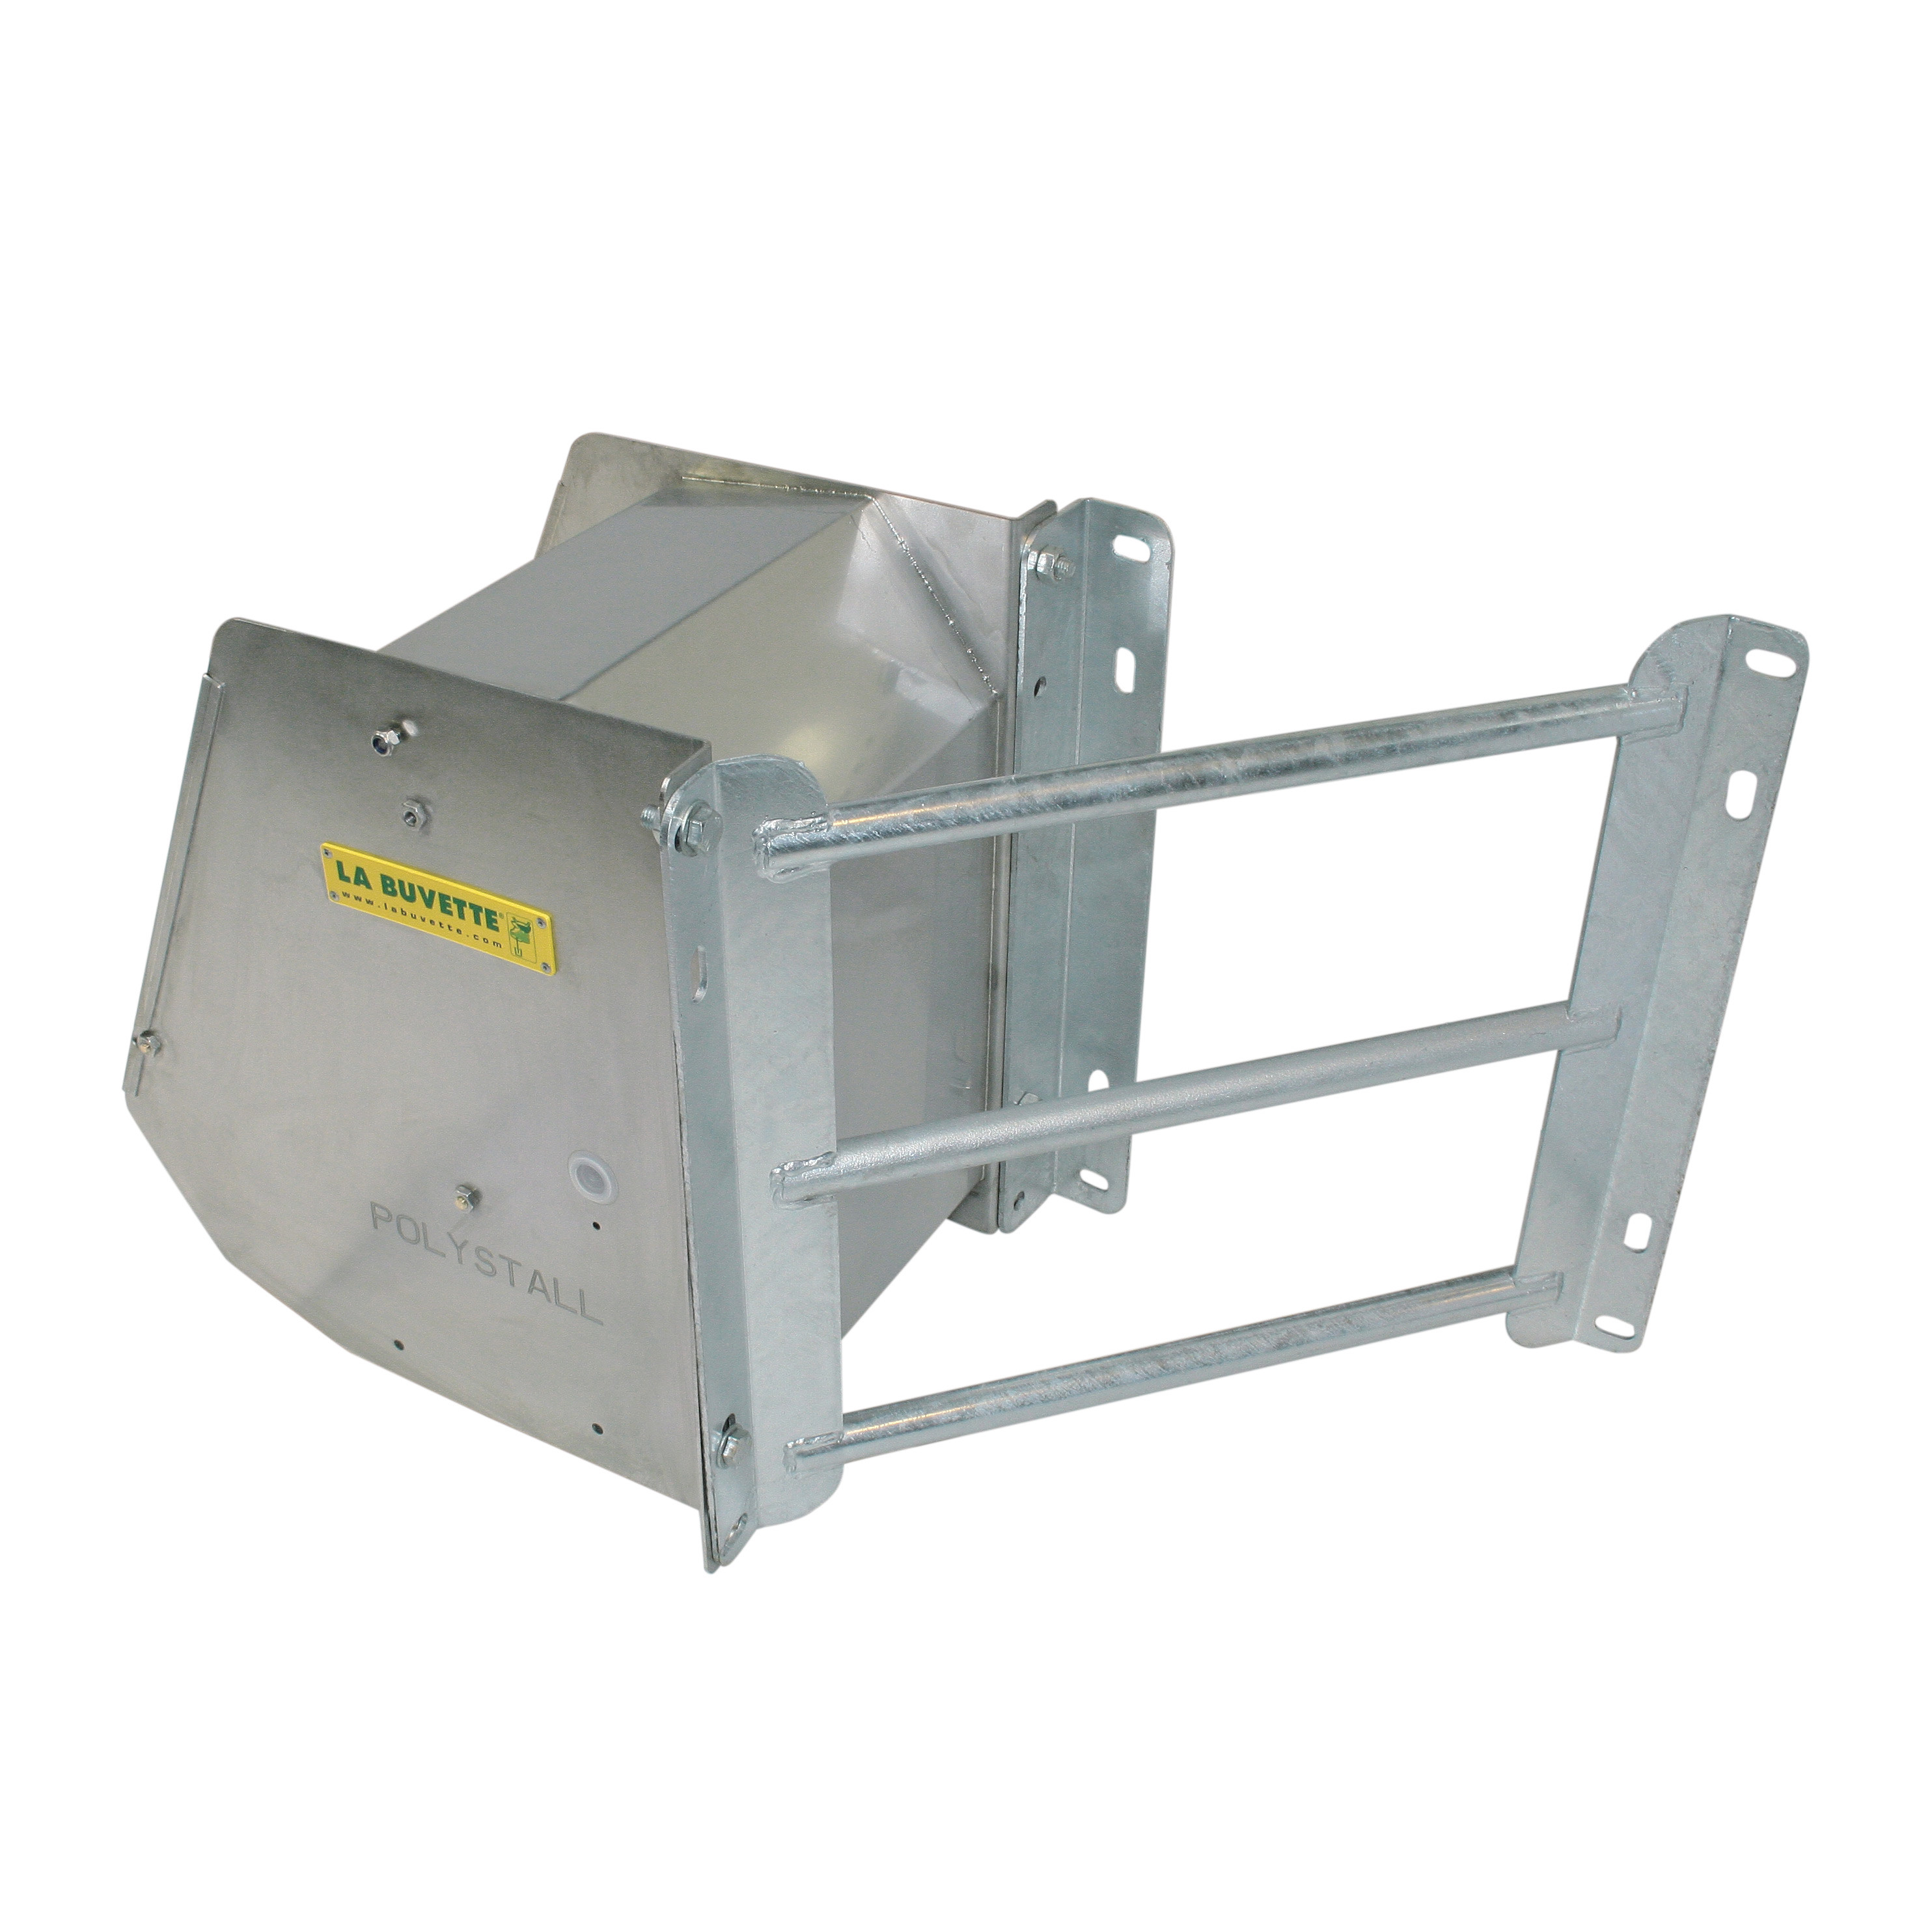 SIDE MOUNTING SUPPORT POLYSTALL